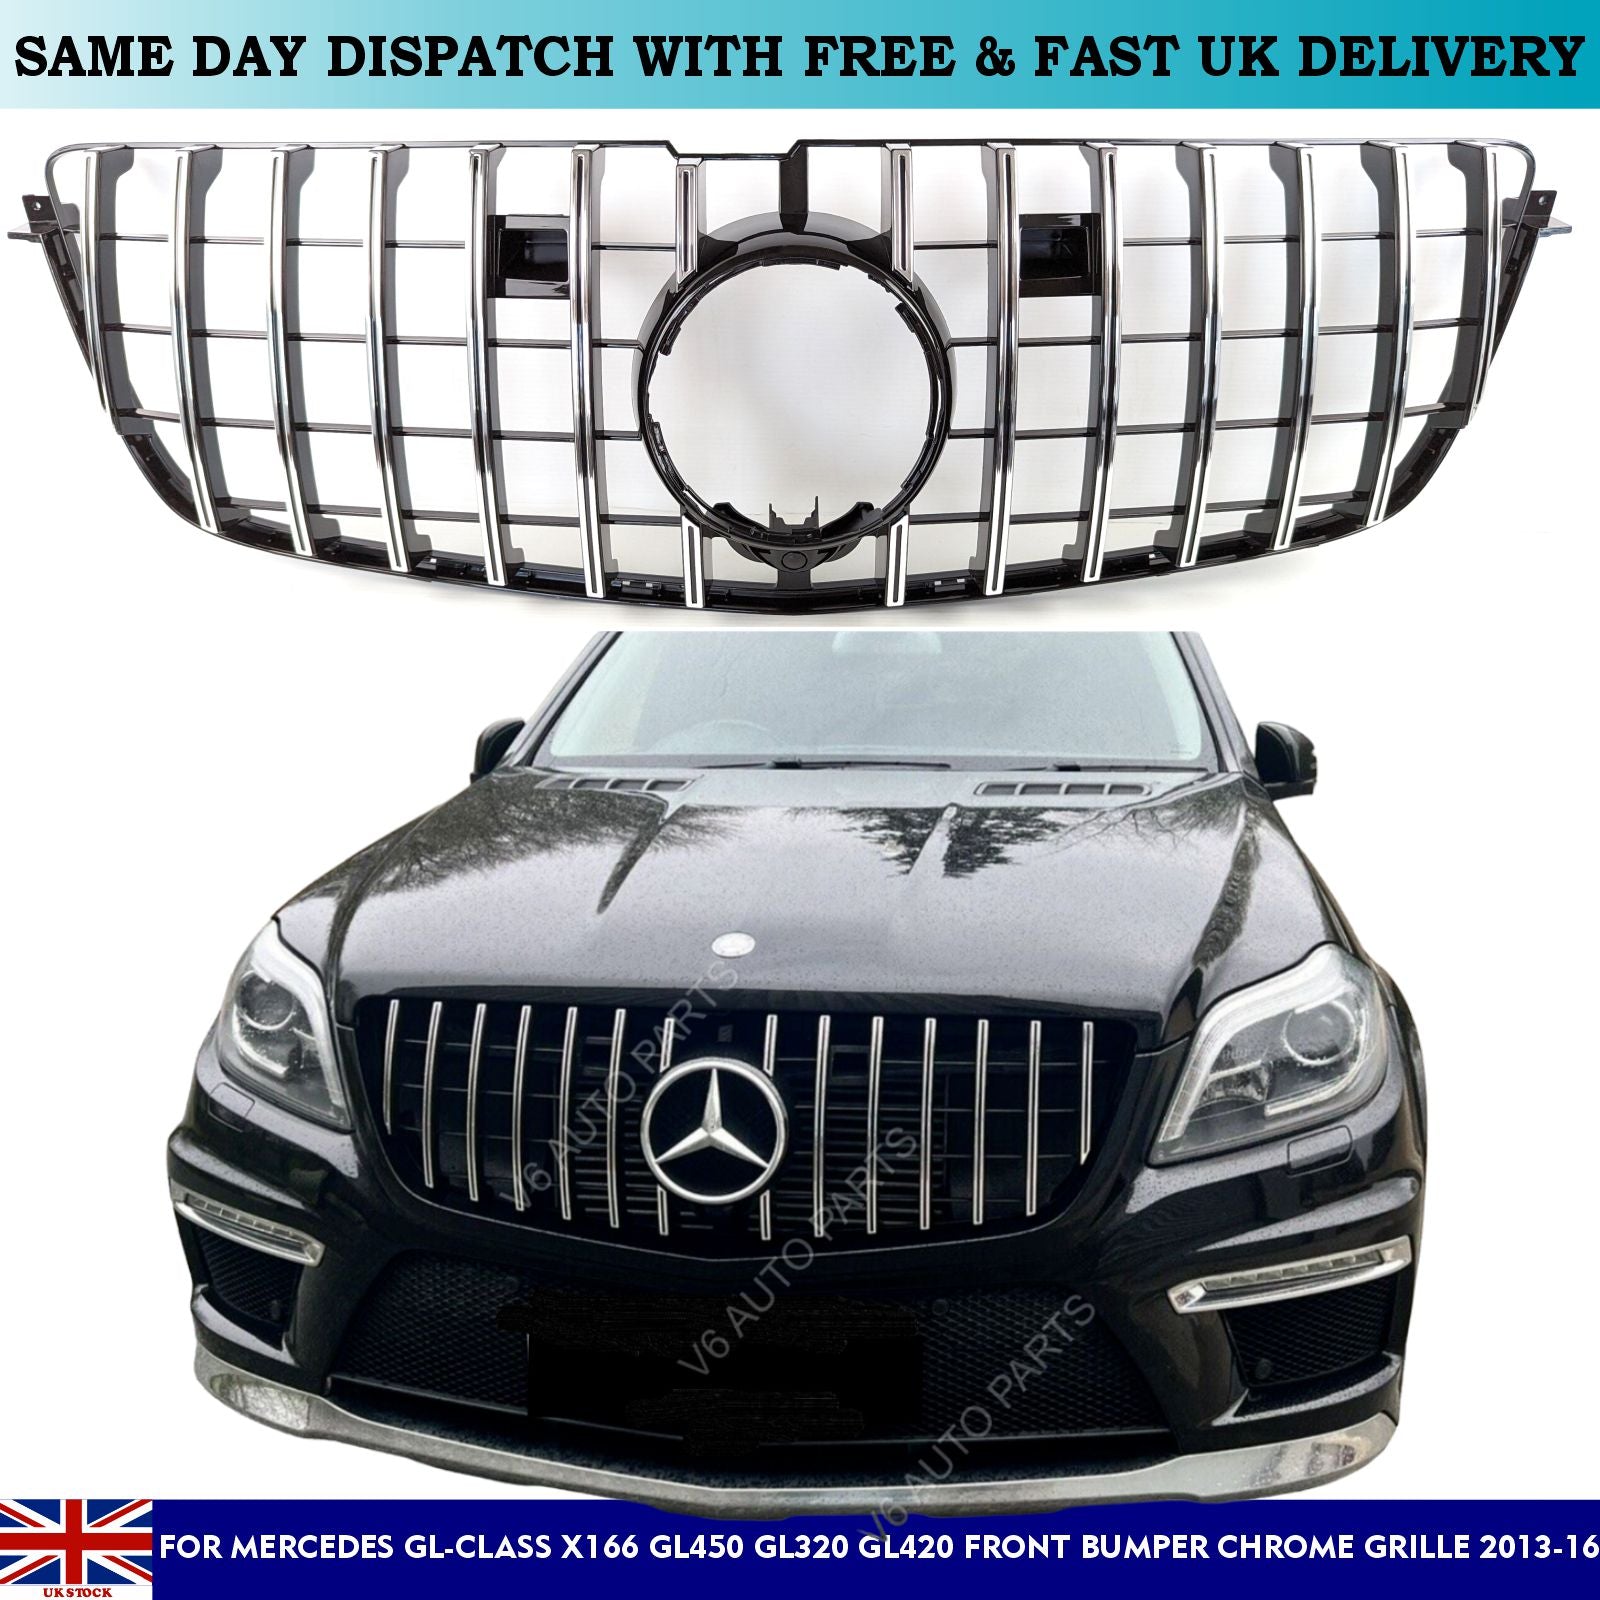 For Mercedes GL-Class W166 GL500 GL350 GL450 Front Radiator Grille 2013-16 GT-R